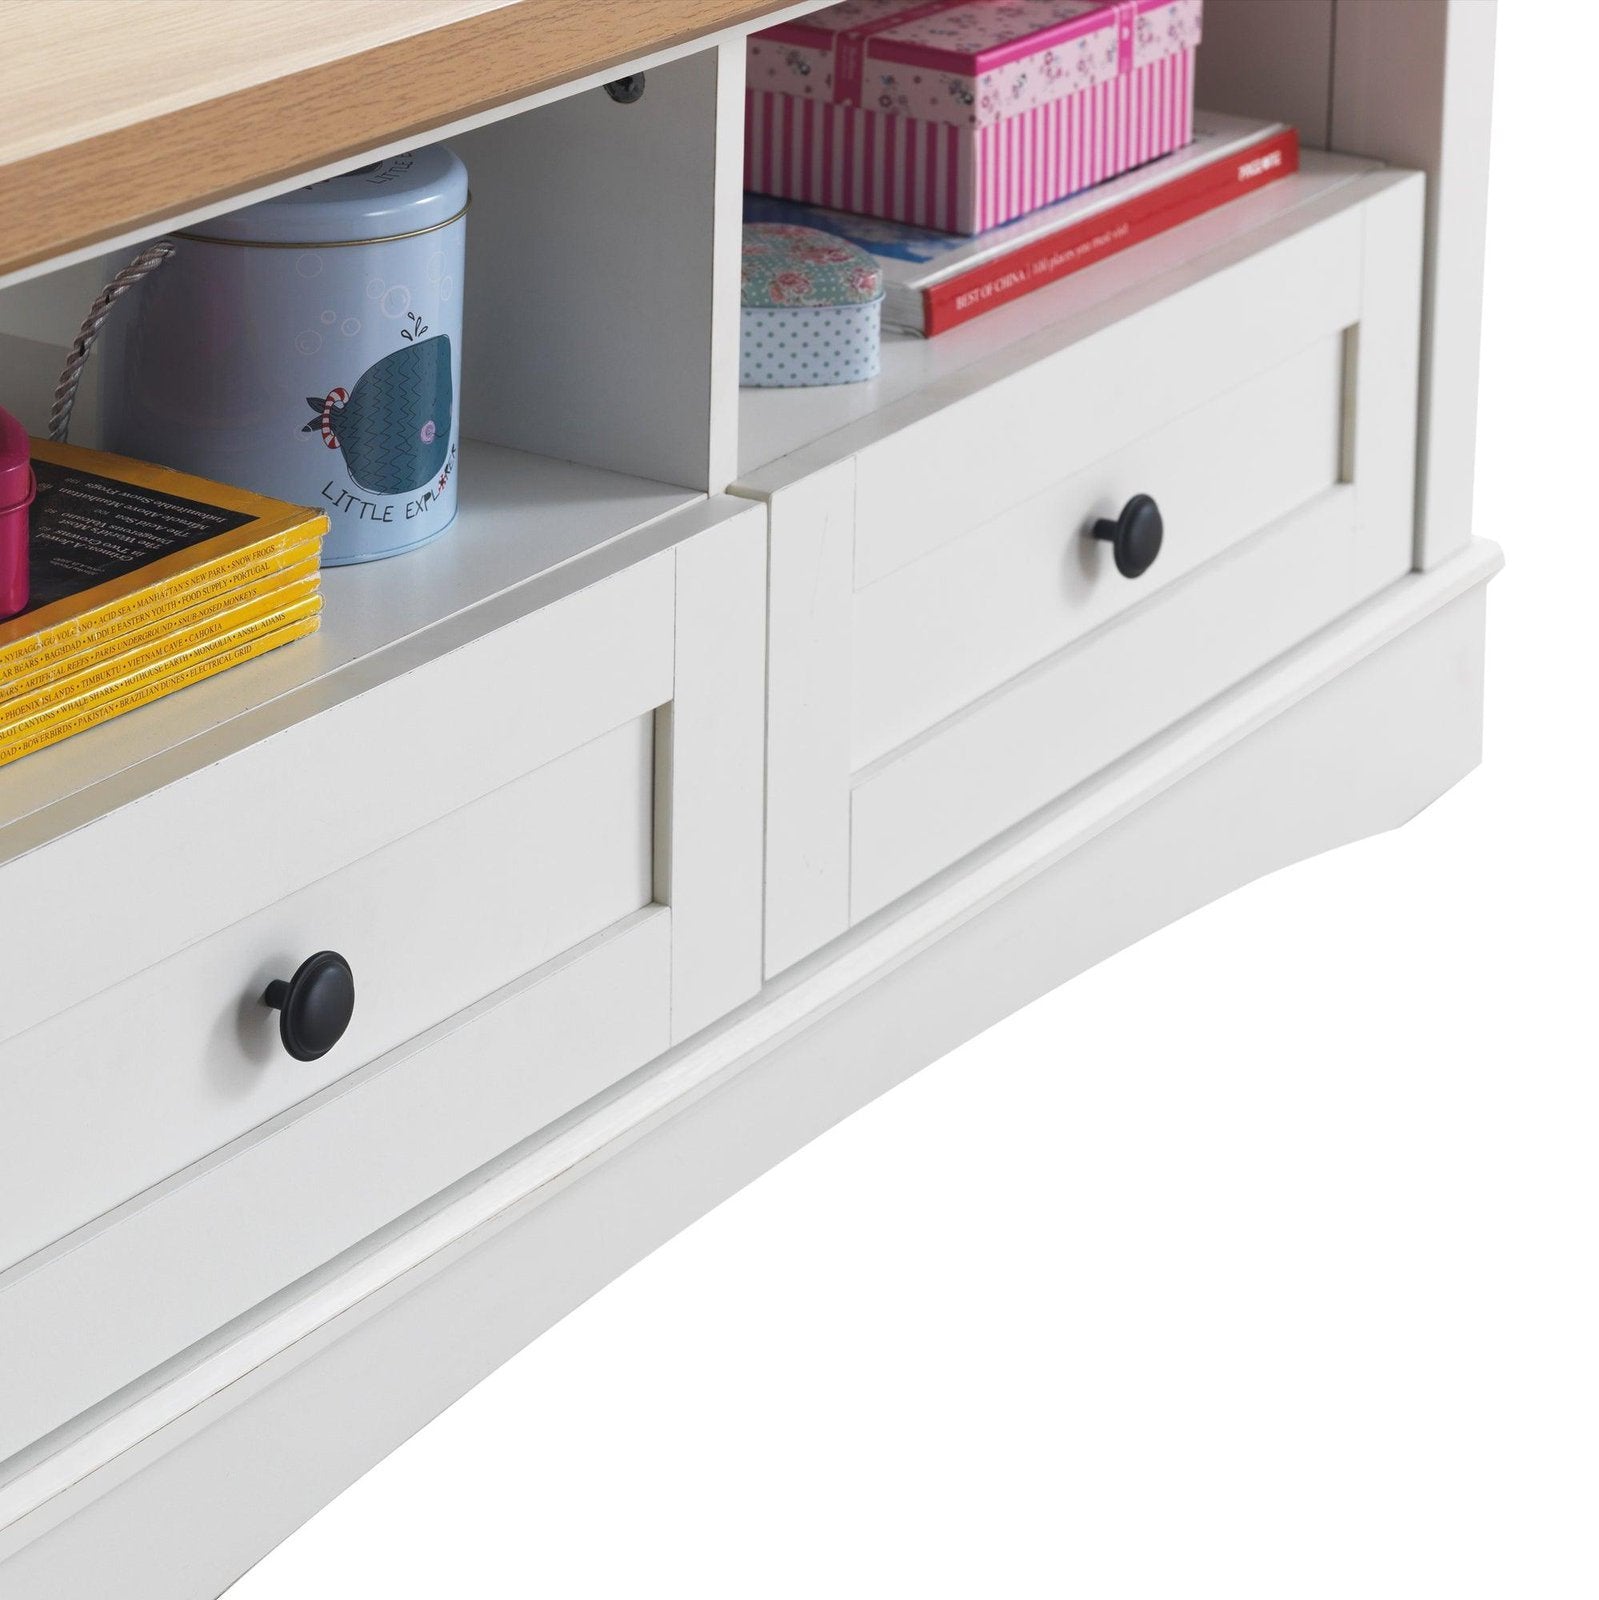 Carden Coffee Table Drawers allhomely